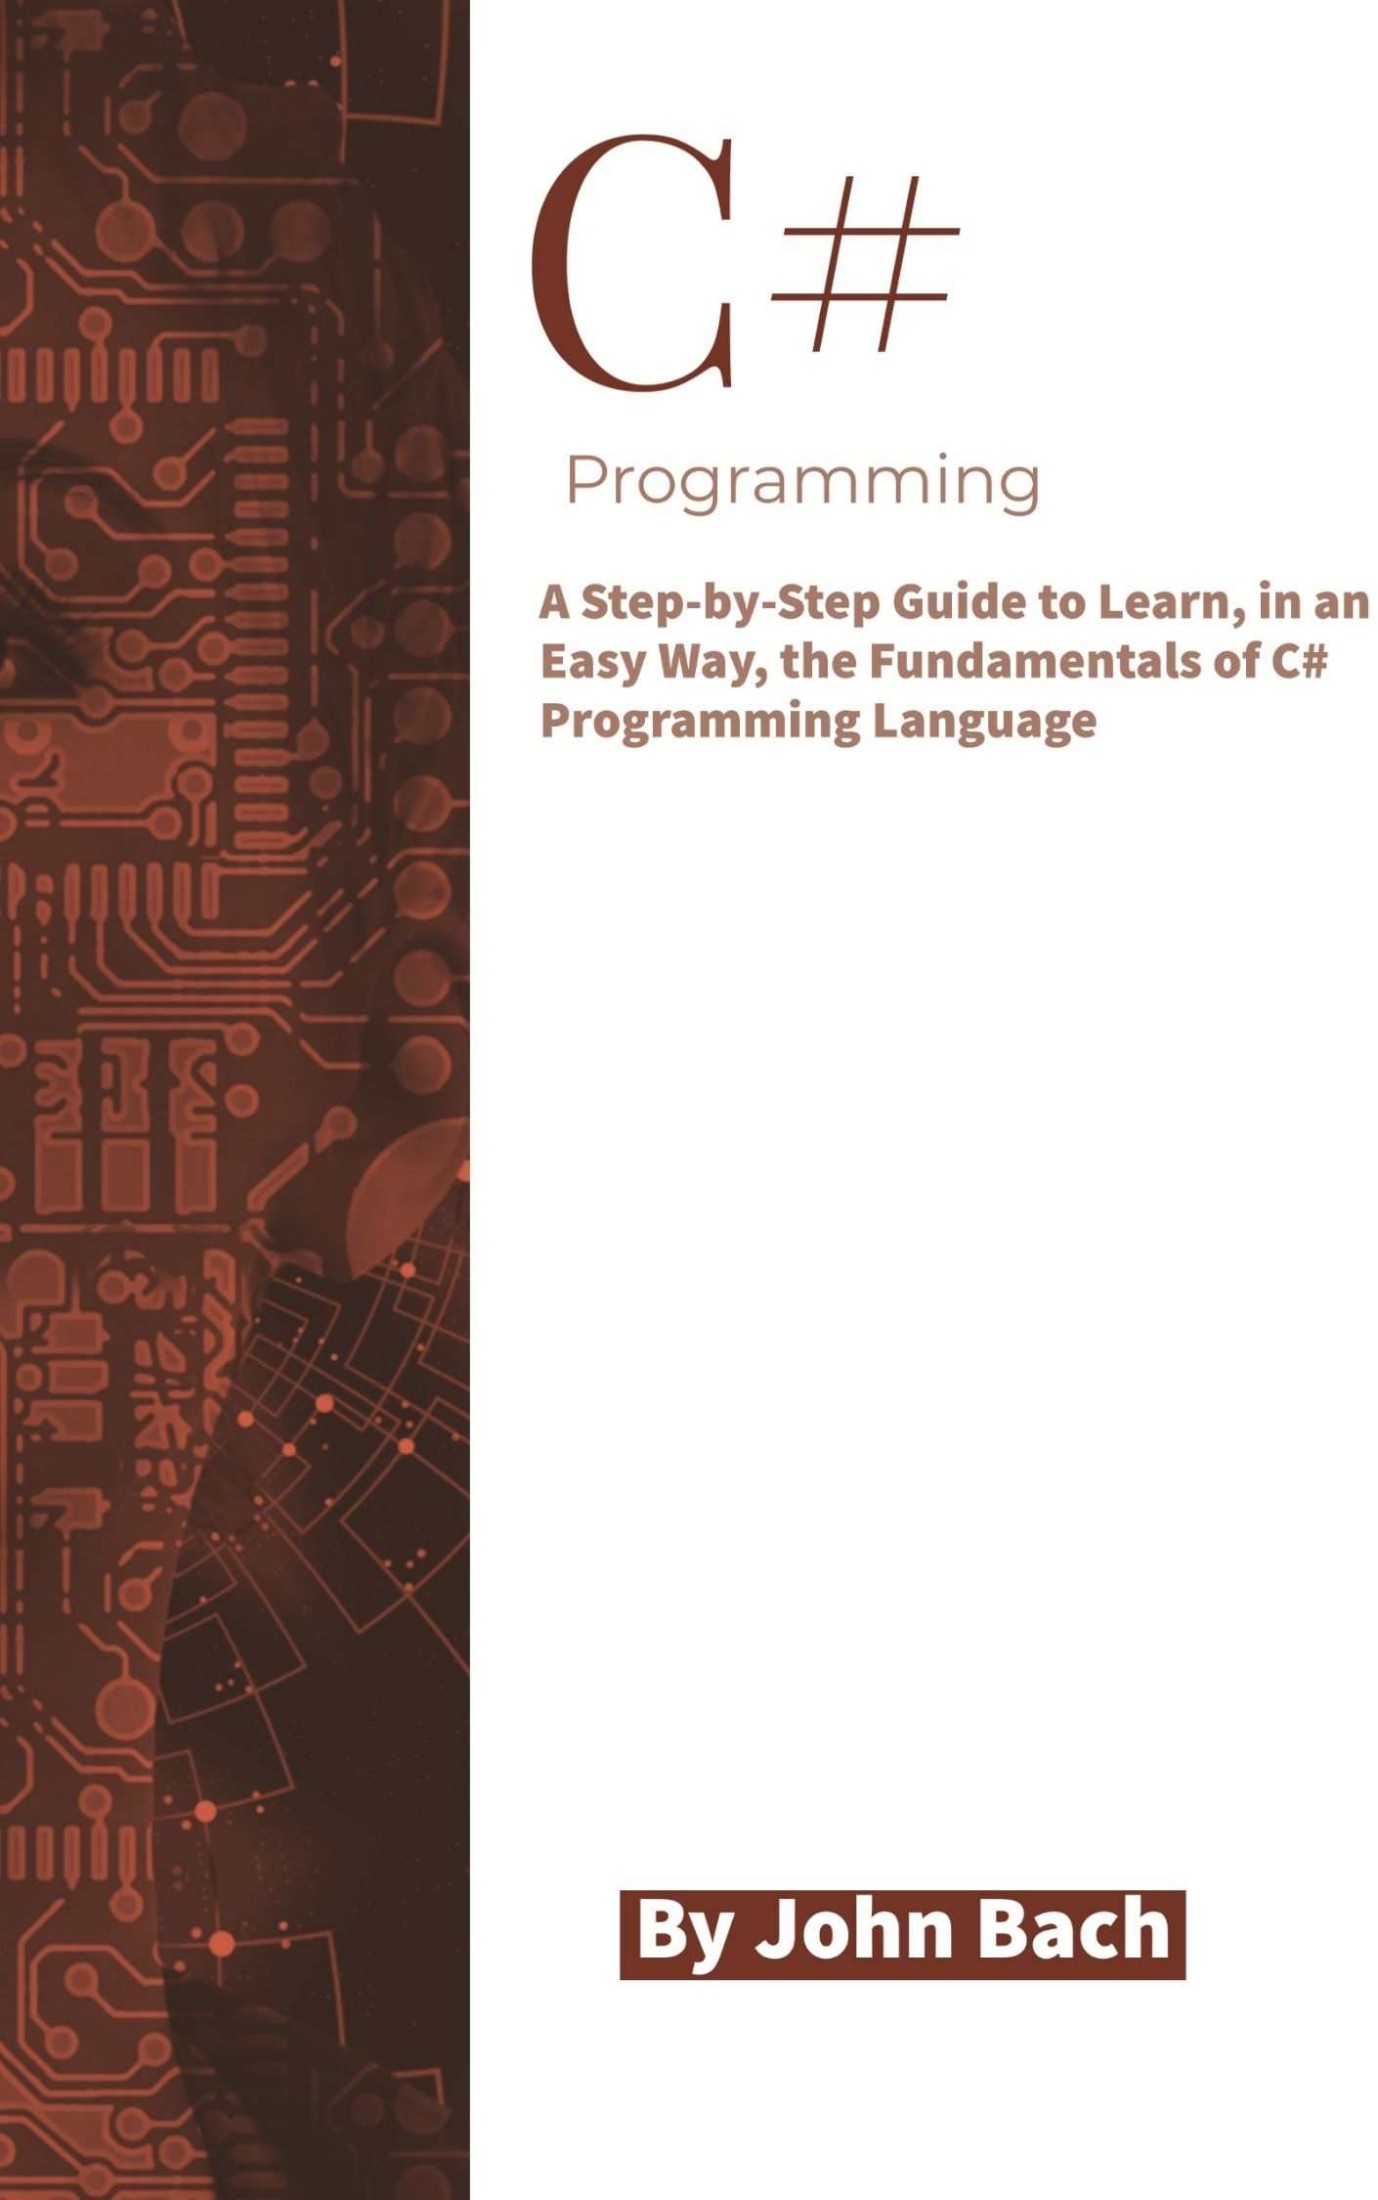 C# Programming: A Step-By-Step Guide to Learn, in an Easy Way, the Fundamentals of C# Programming Language